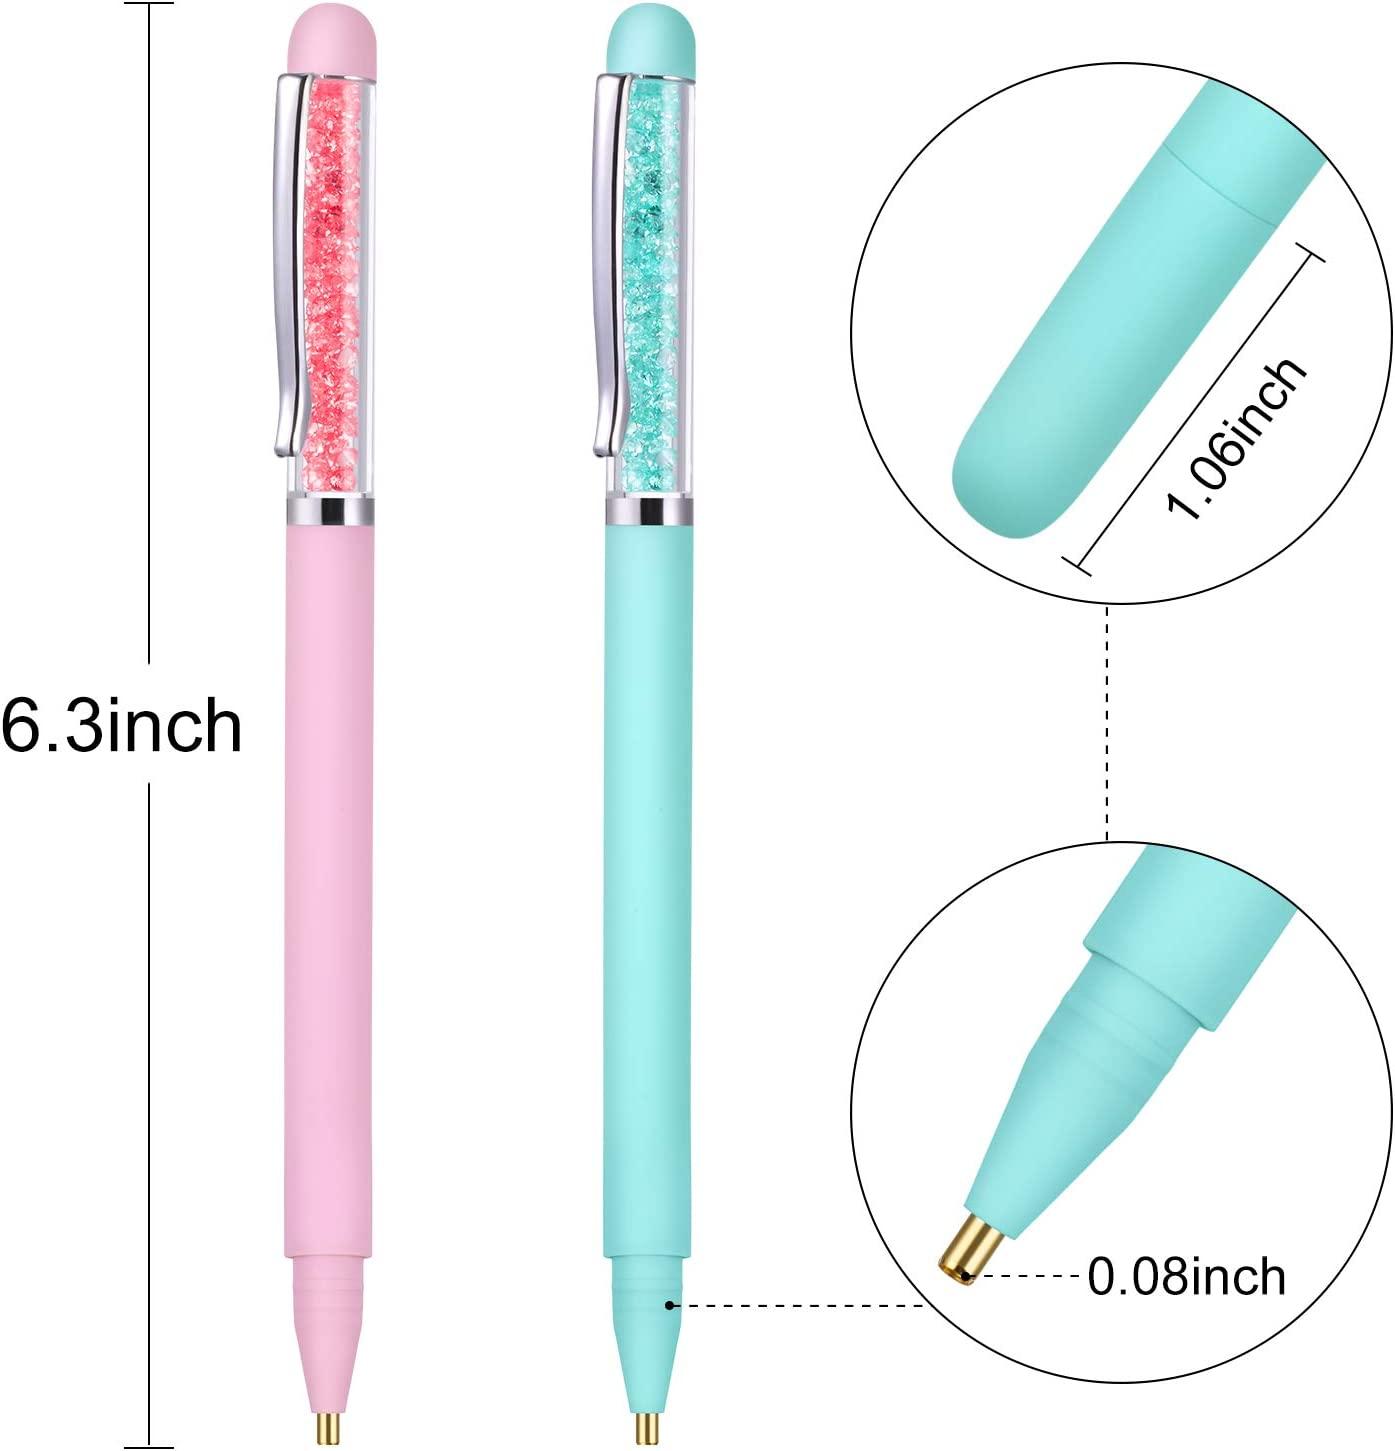 5D Diamond Painting Drill Pen Point Drill Pen Diamond Painting Tools Diamond Painting Pen for DIY Crafts Nail Art Sewing Crossing Stitch Accessories